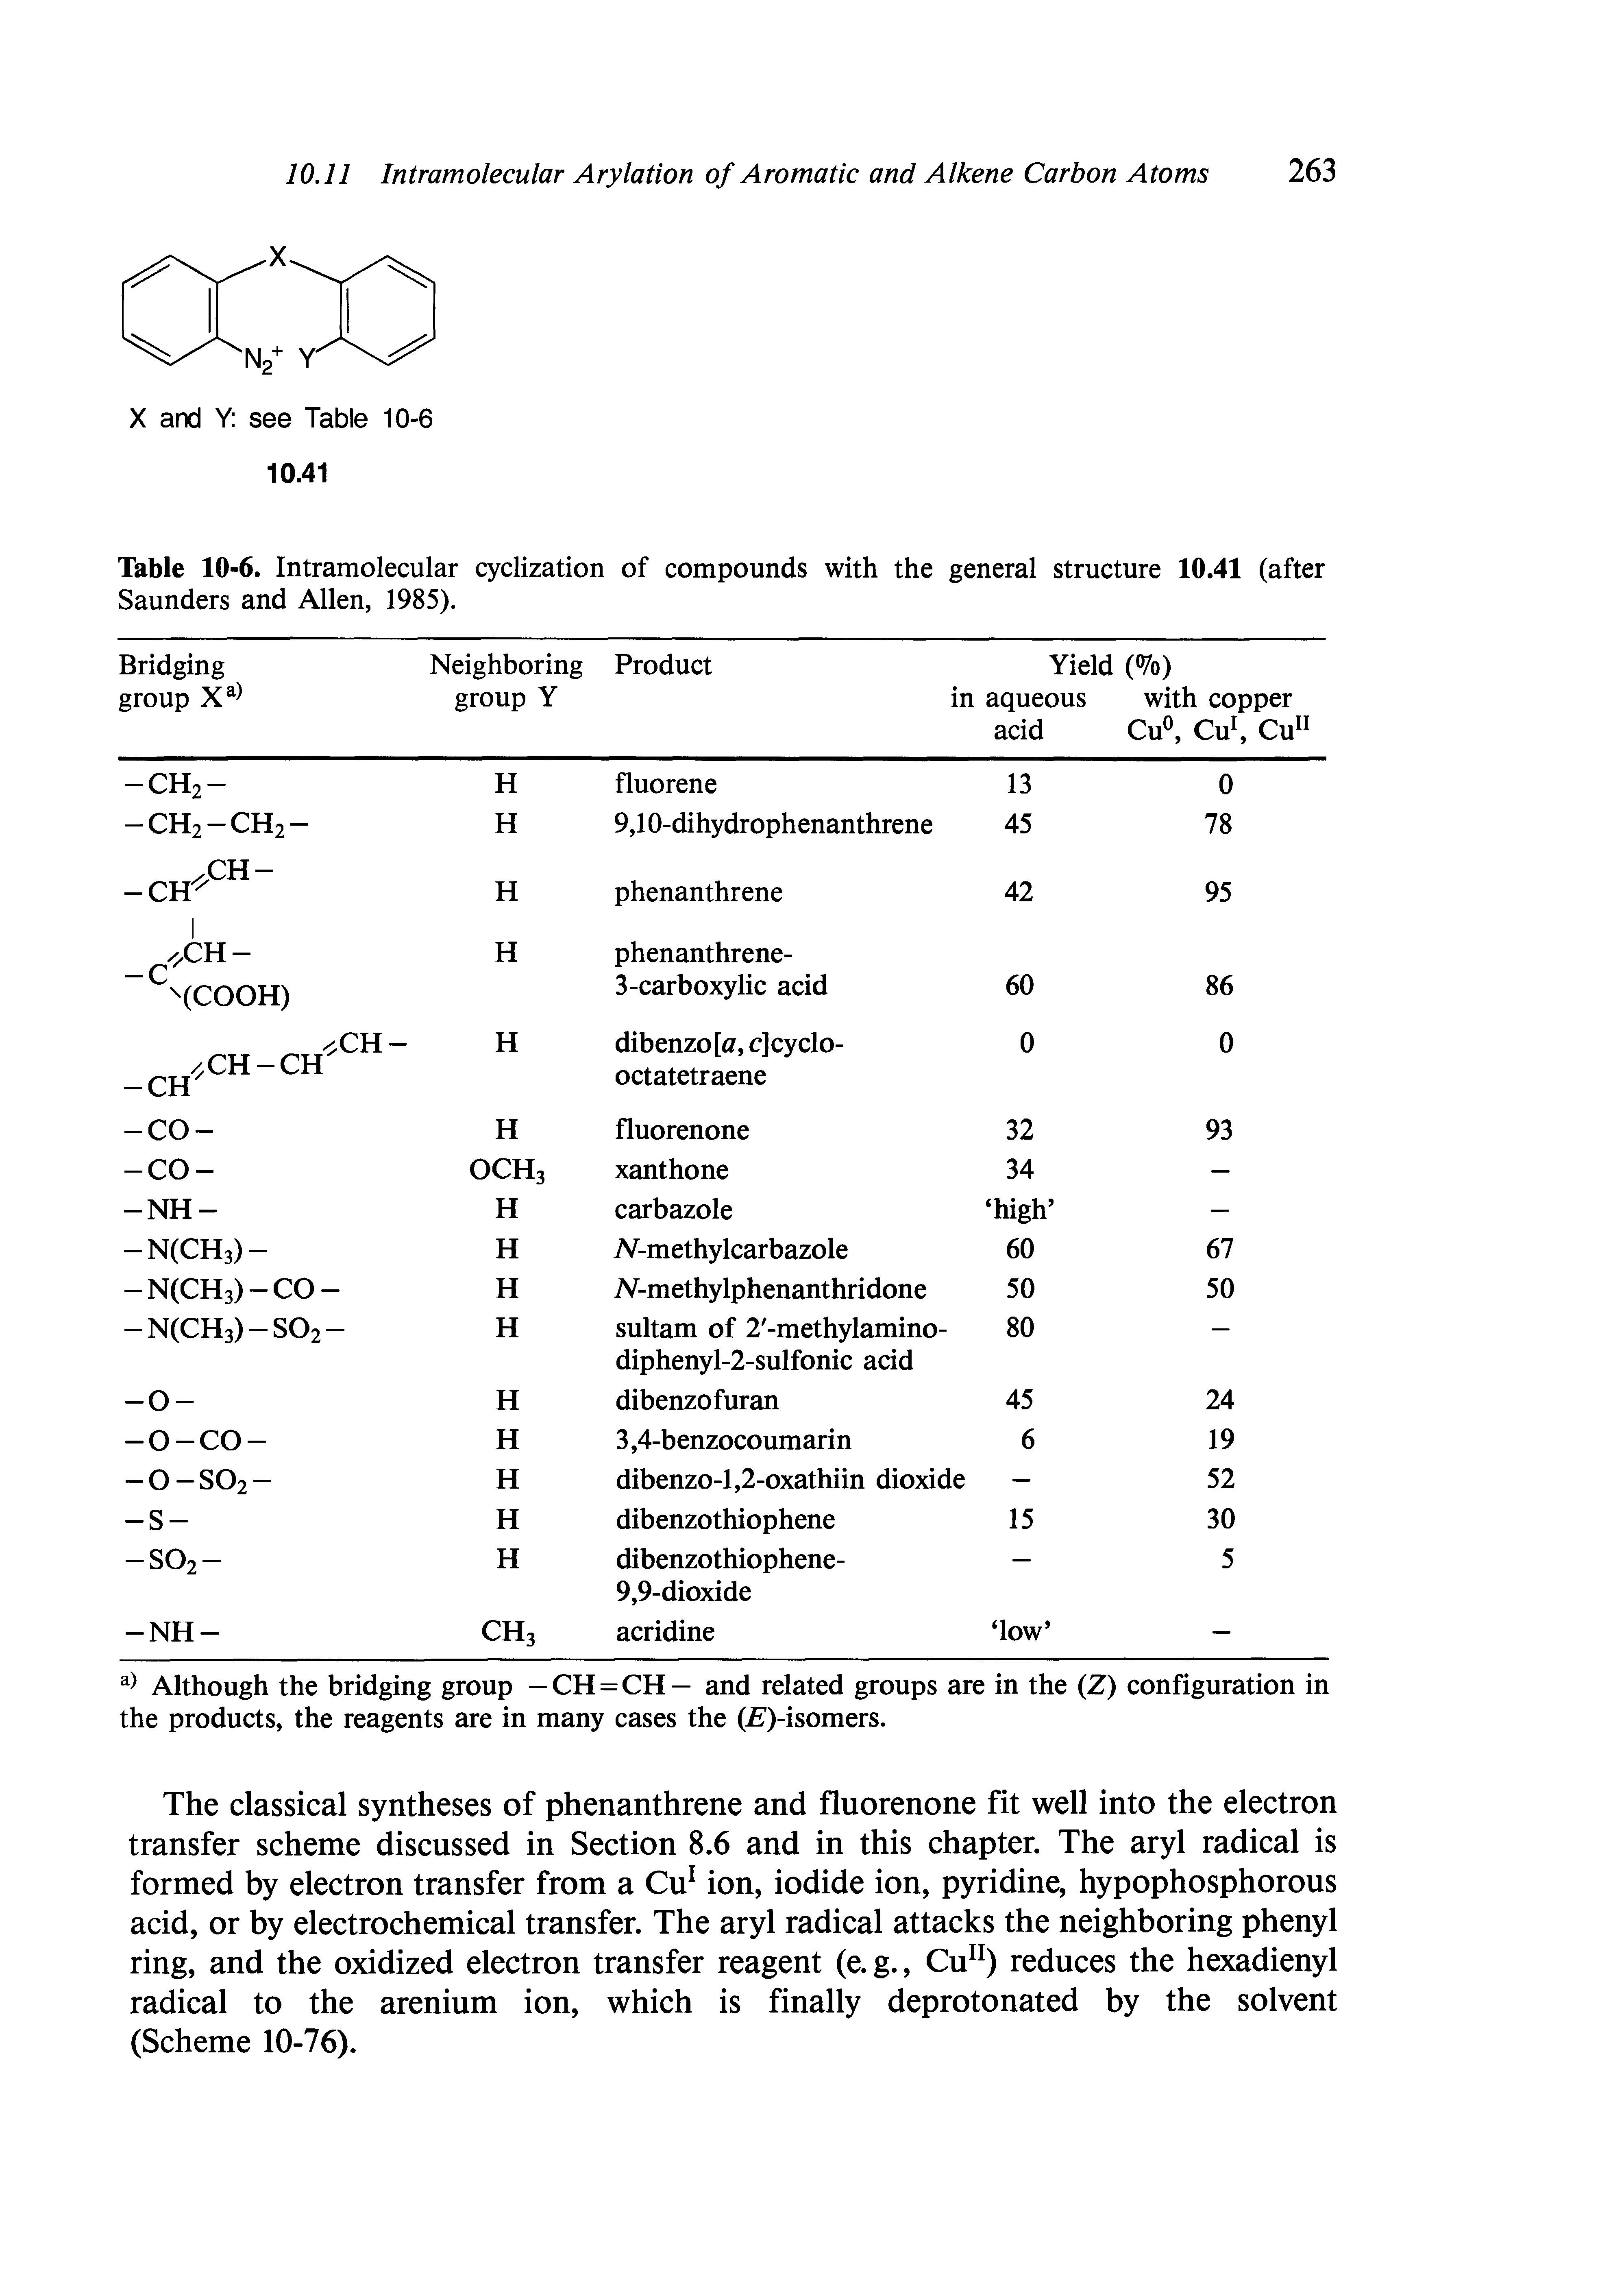 Table 10-6. Intramolecular cyclization of compounds with the general structure 10.41 (after Saunders and Allen, 1985).